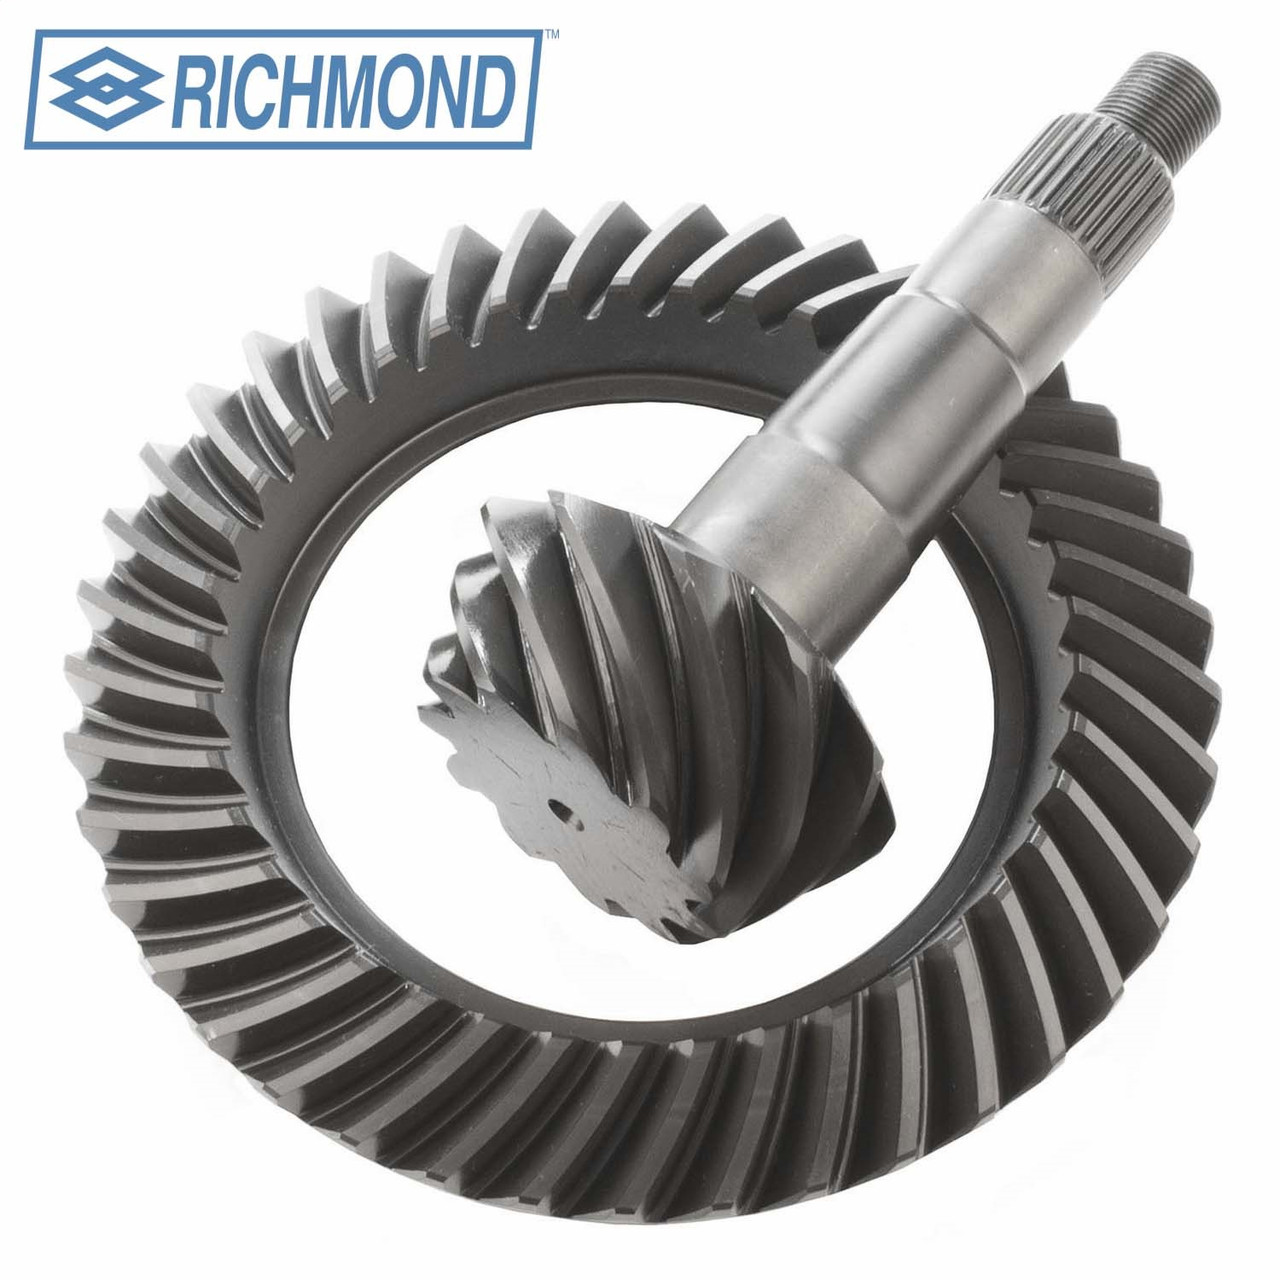 Richmond Gear 49-0096-1 Street Gear Differential Ring and Pinion